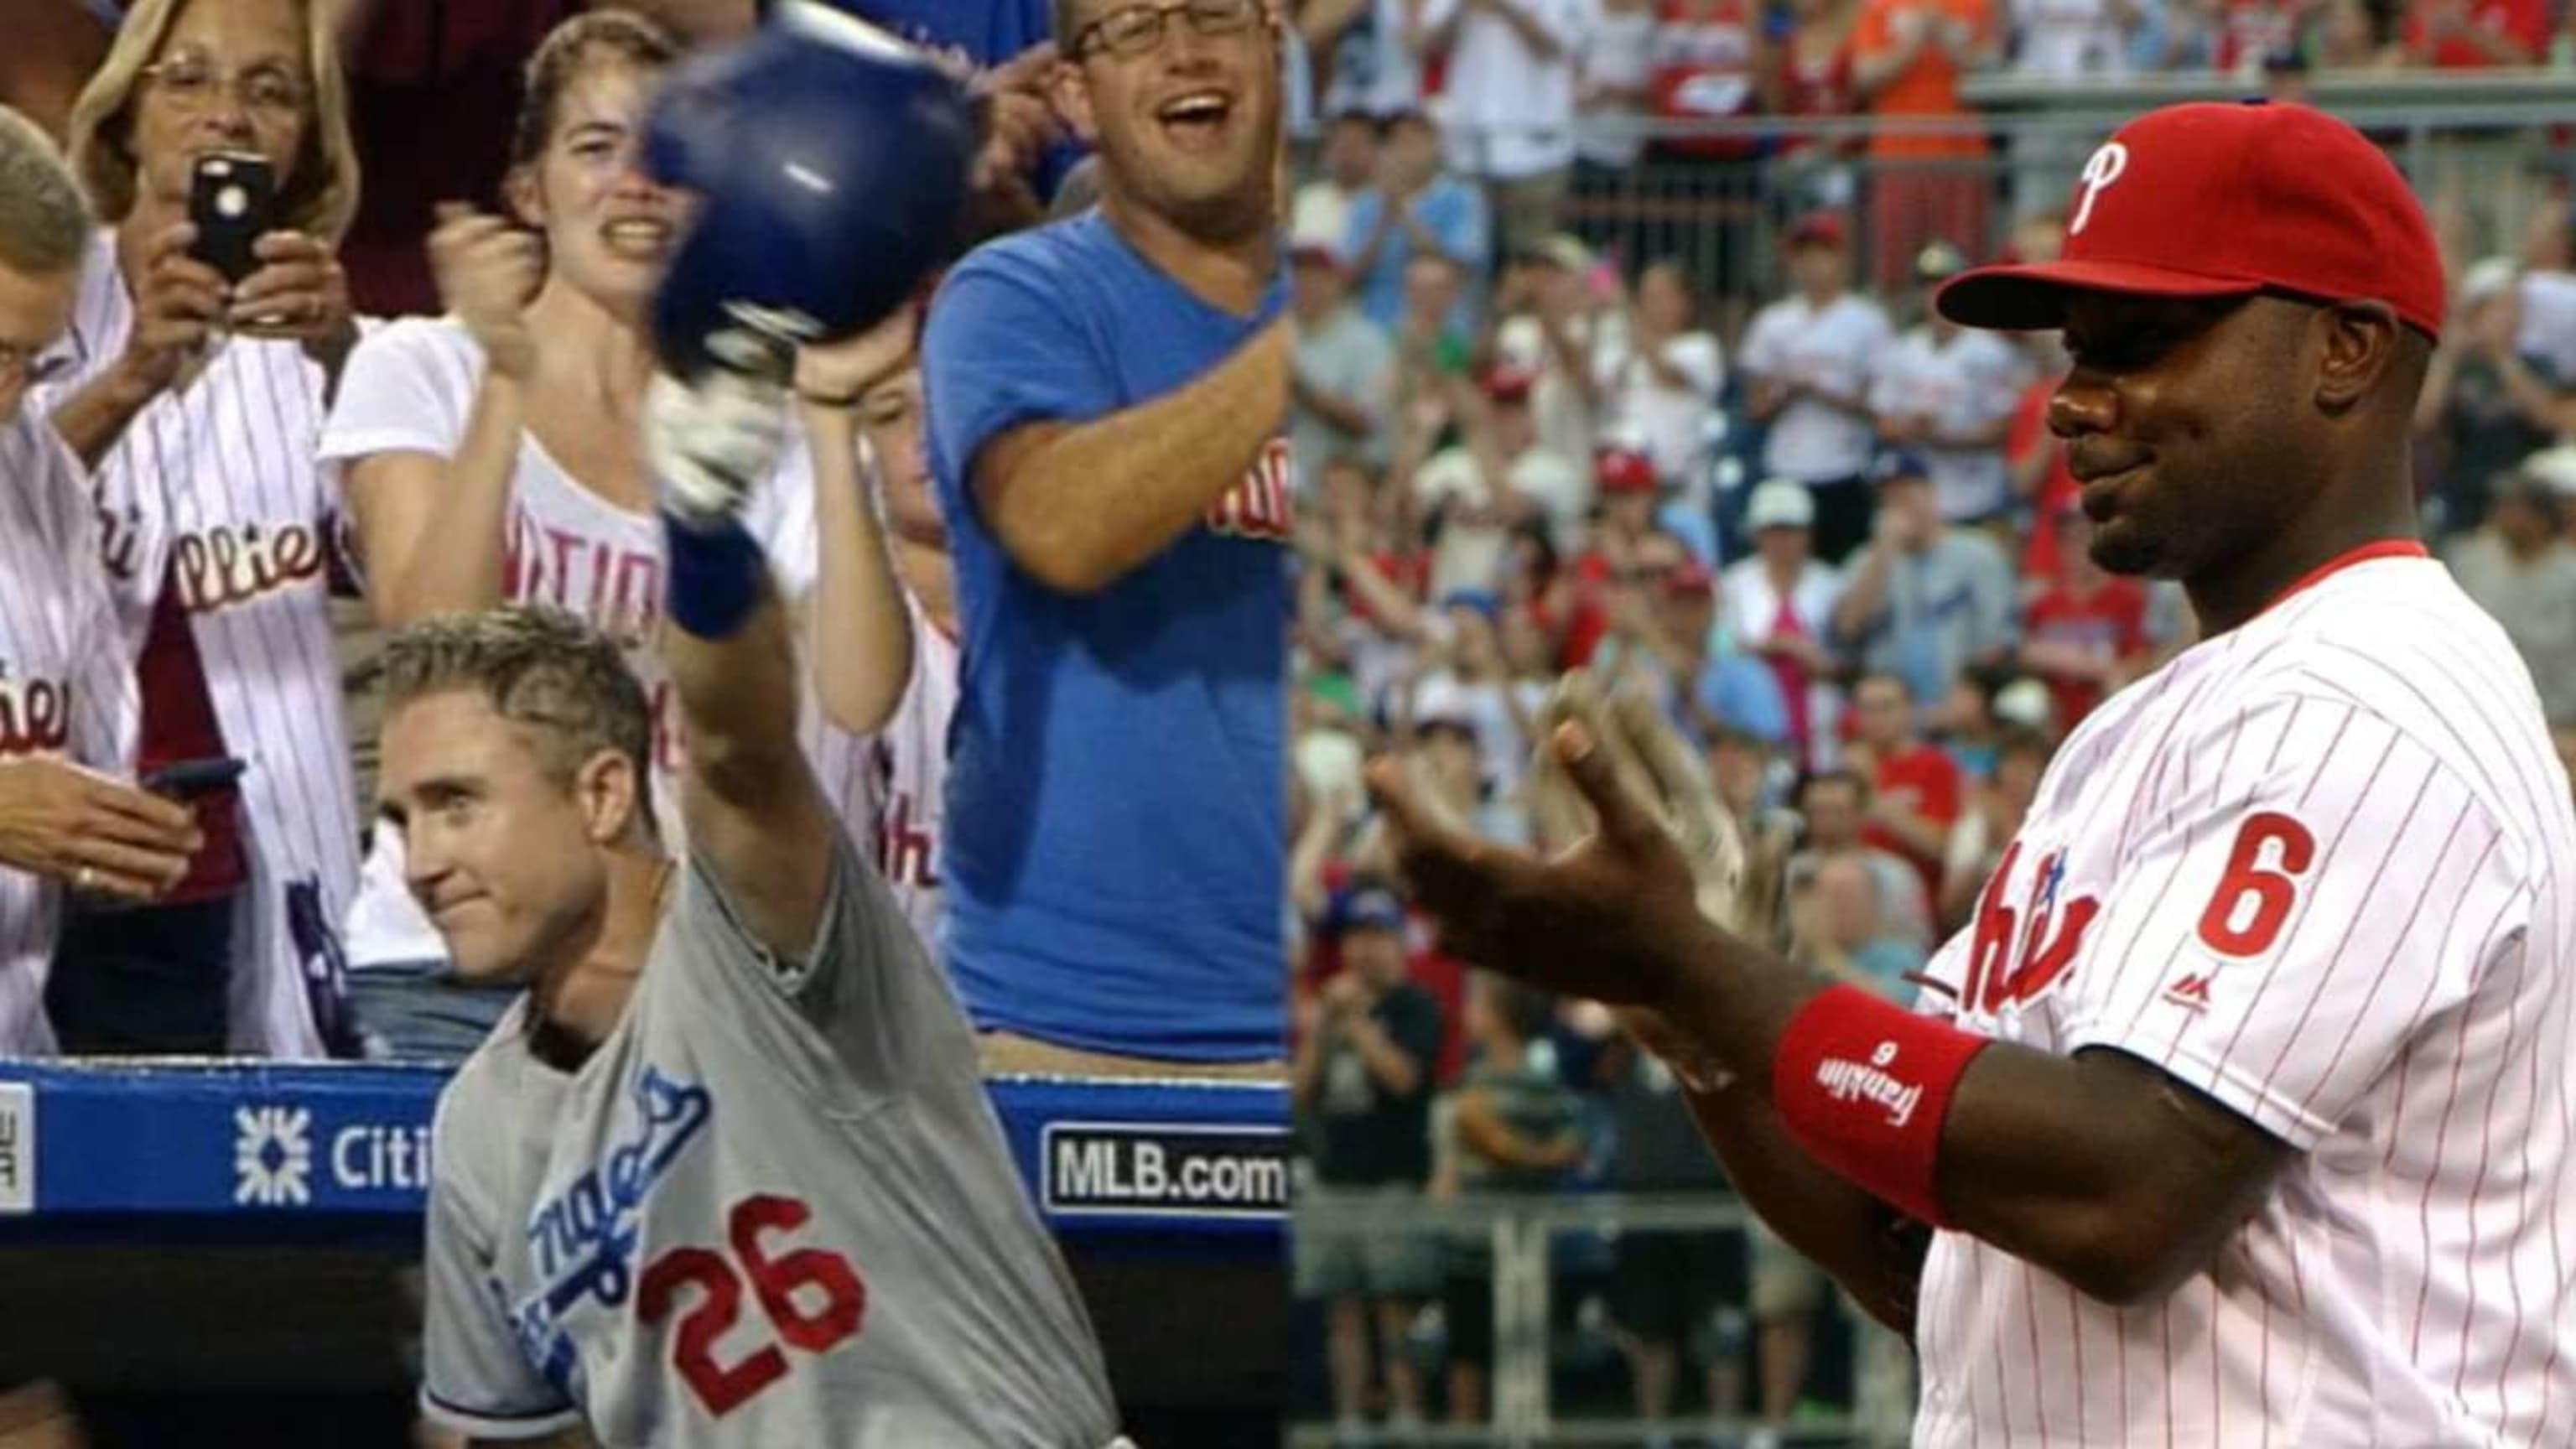 With Utley's return, Phillies' chase is on - Sports Illustrated